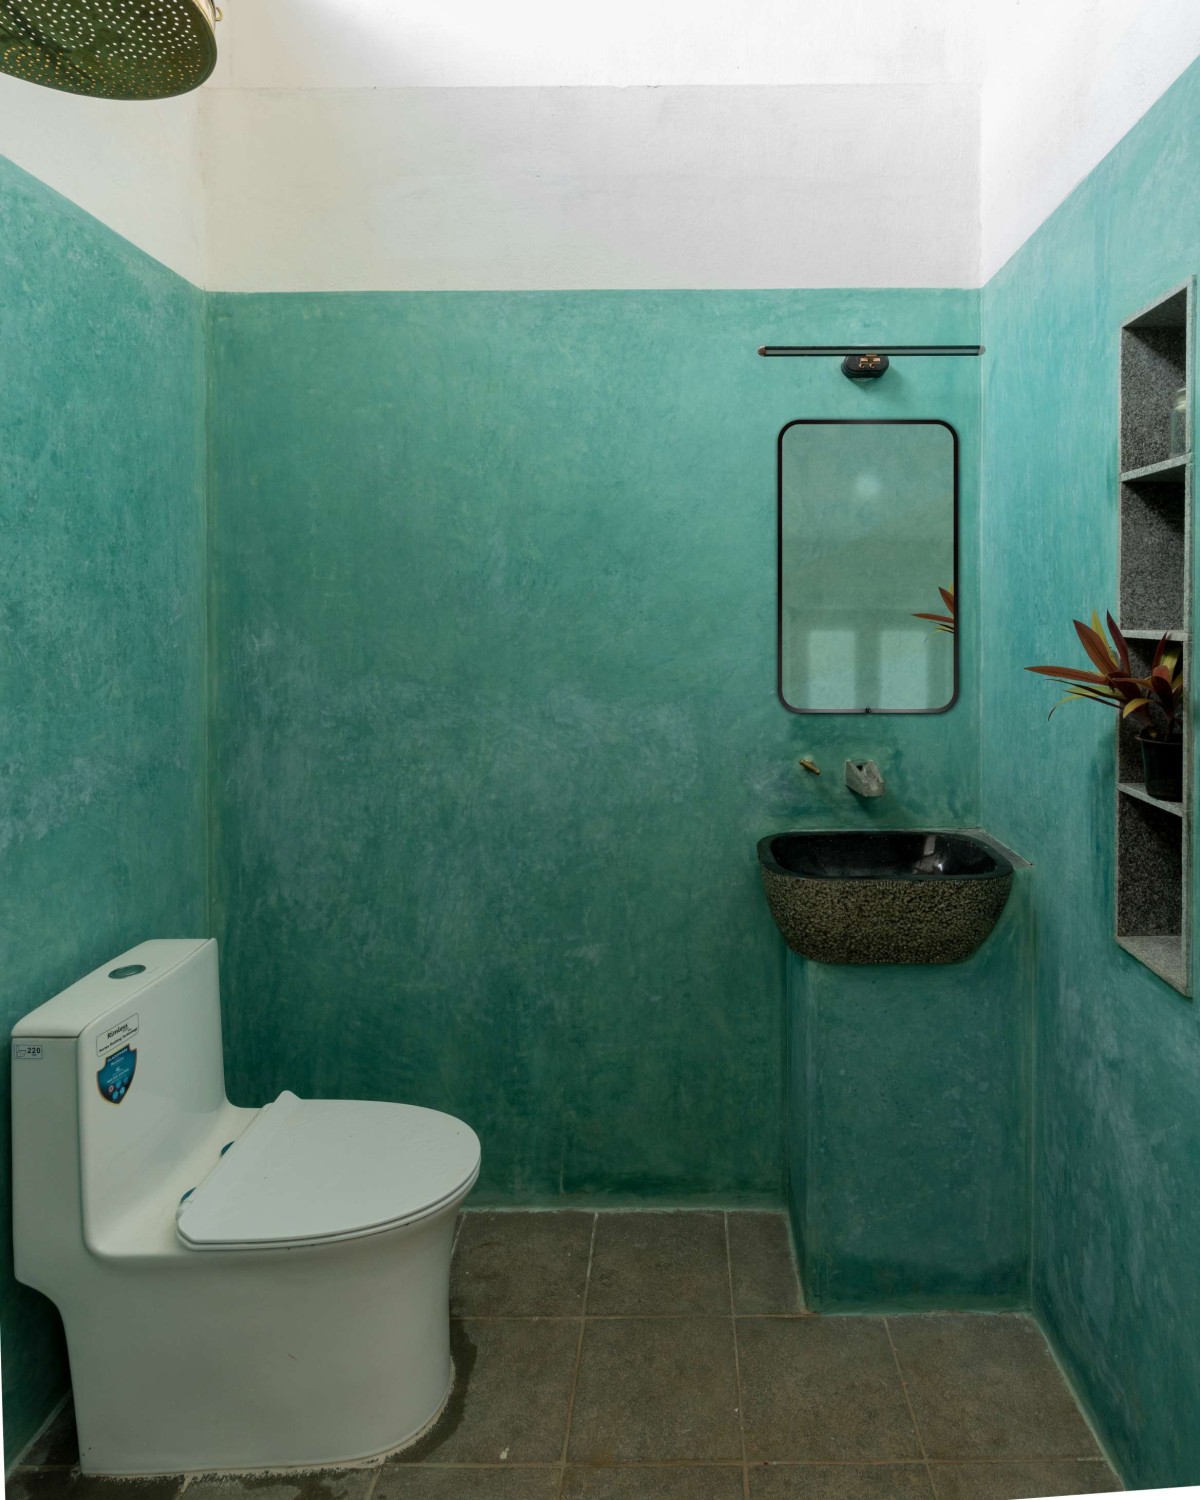 Toilet of Brick Manor by Bhutha Earthen Architecture Studio